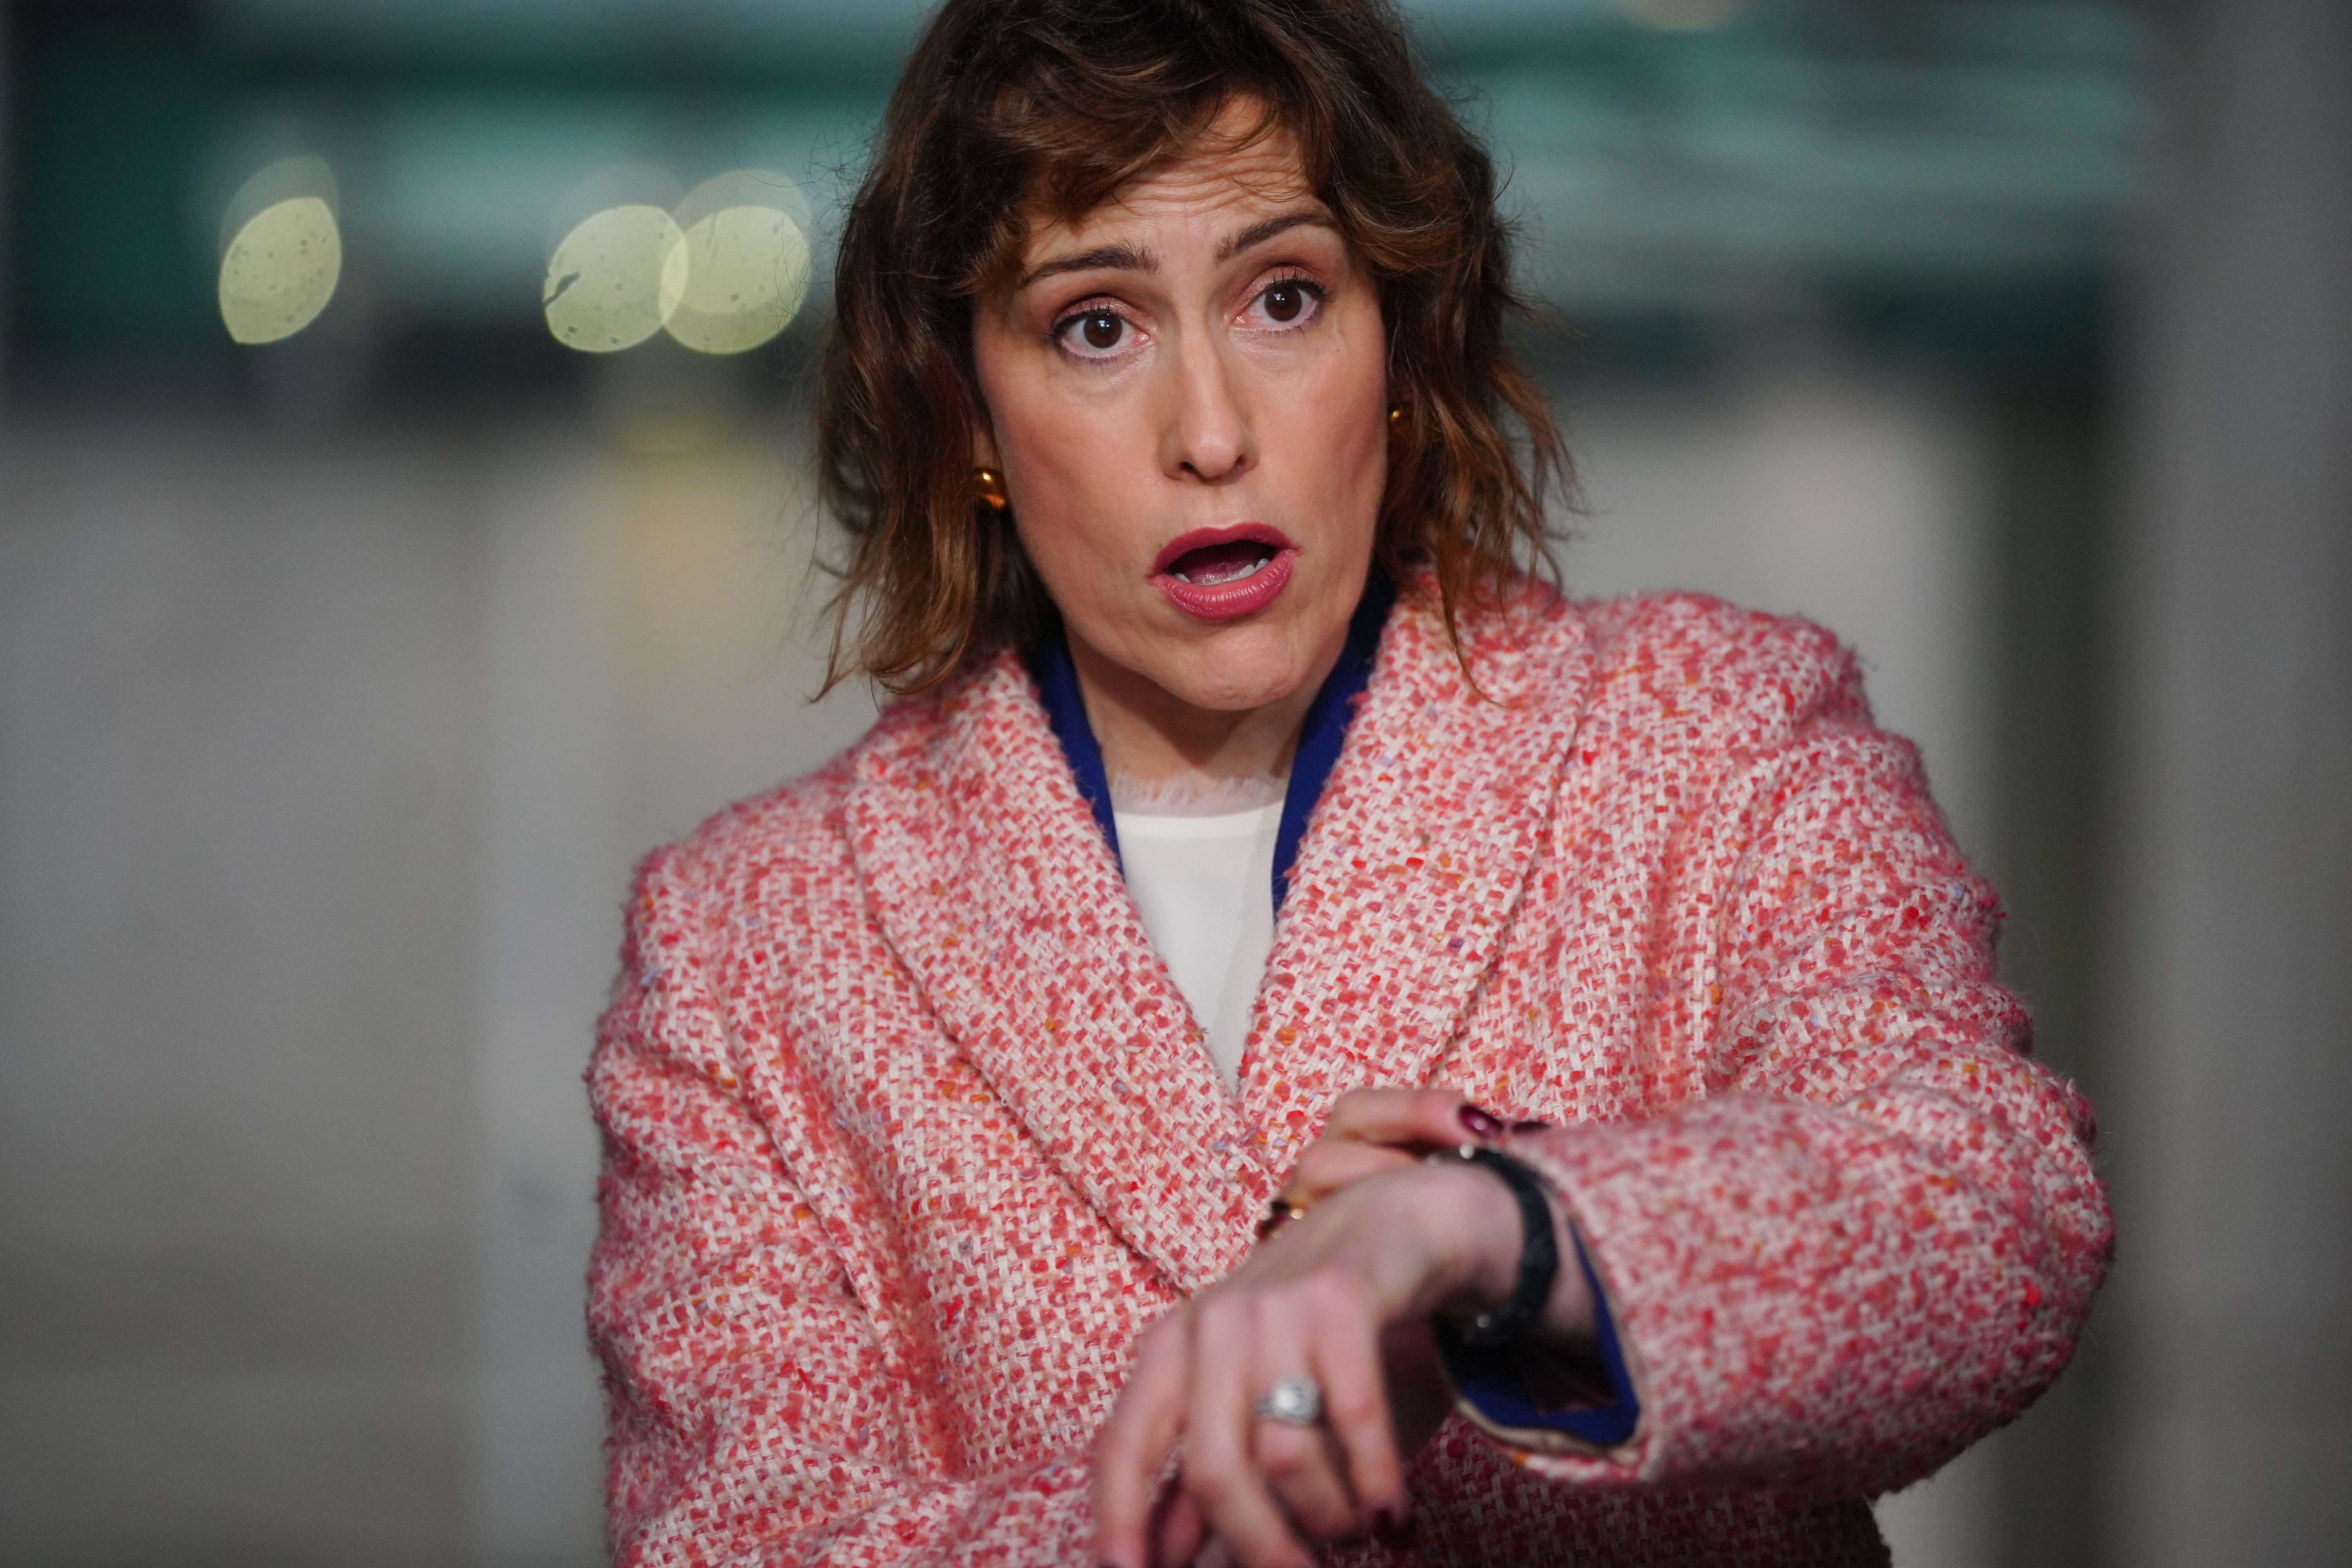 Victoria Atkins, the health secretary, somehow managed to turn what should have been a mildly encouraging piece of news for the government into a debacle